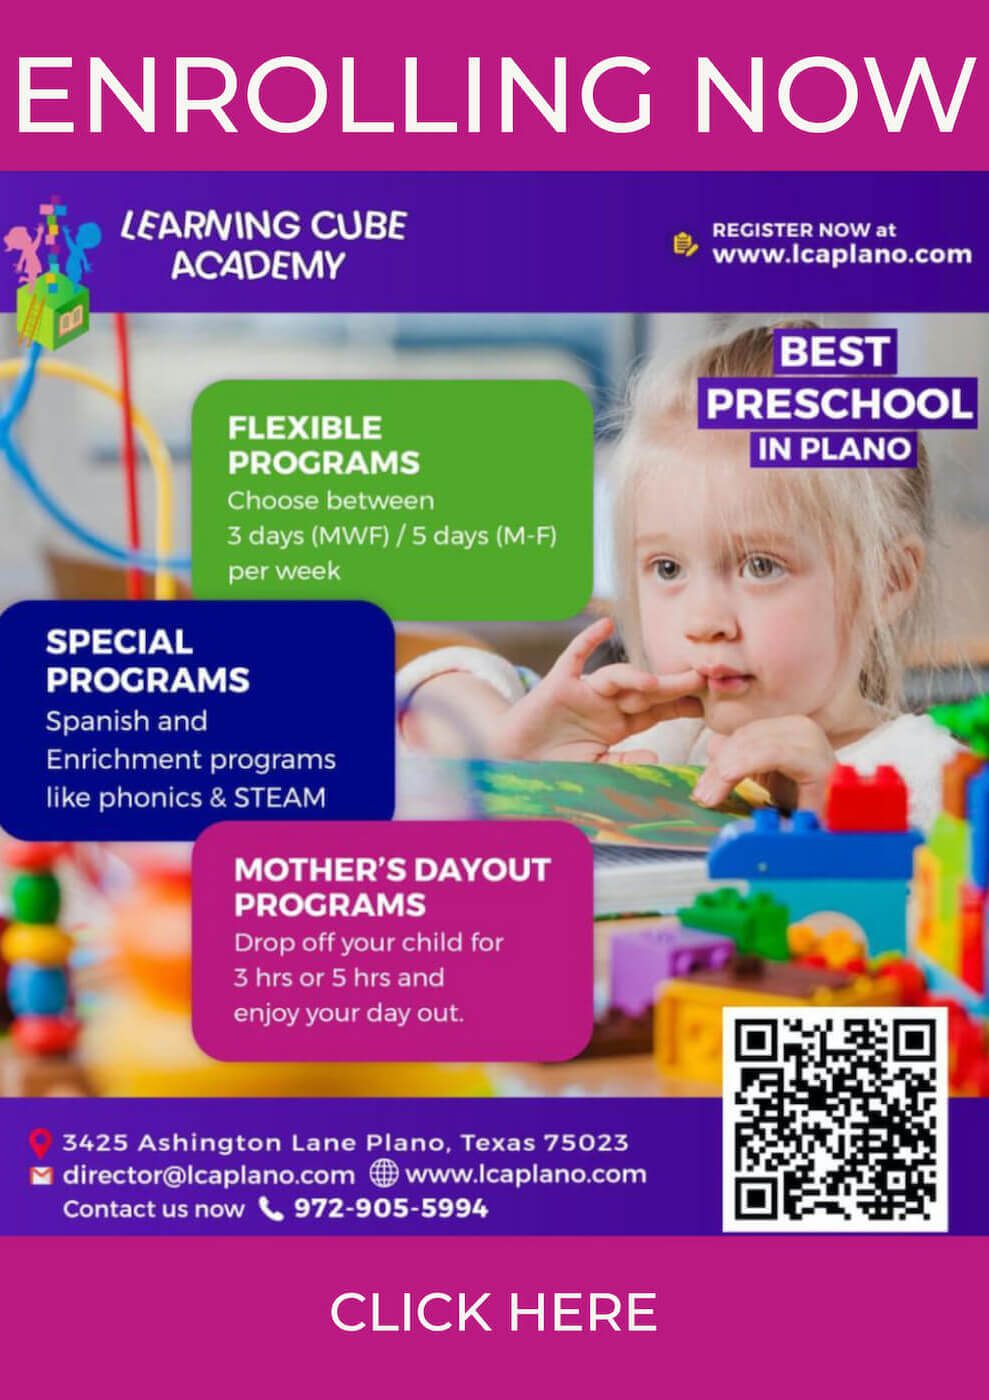 learning-cube-academy-best-preschool-in-plano-moms-choice-enrolling-now